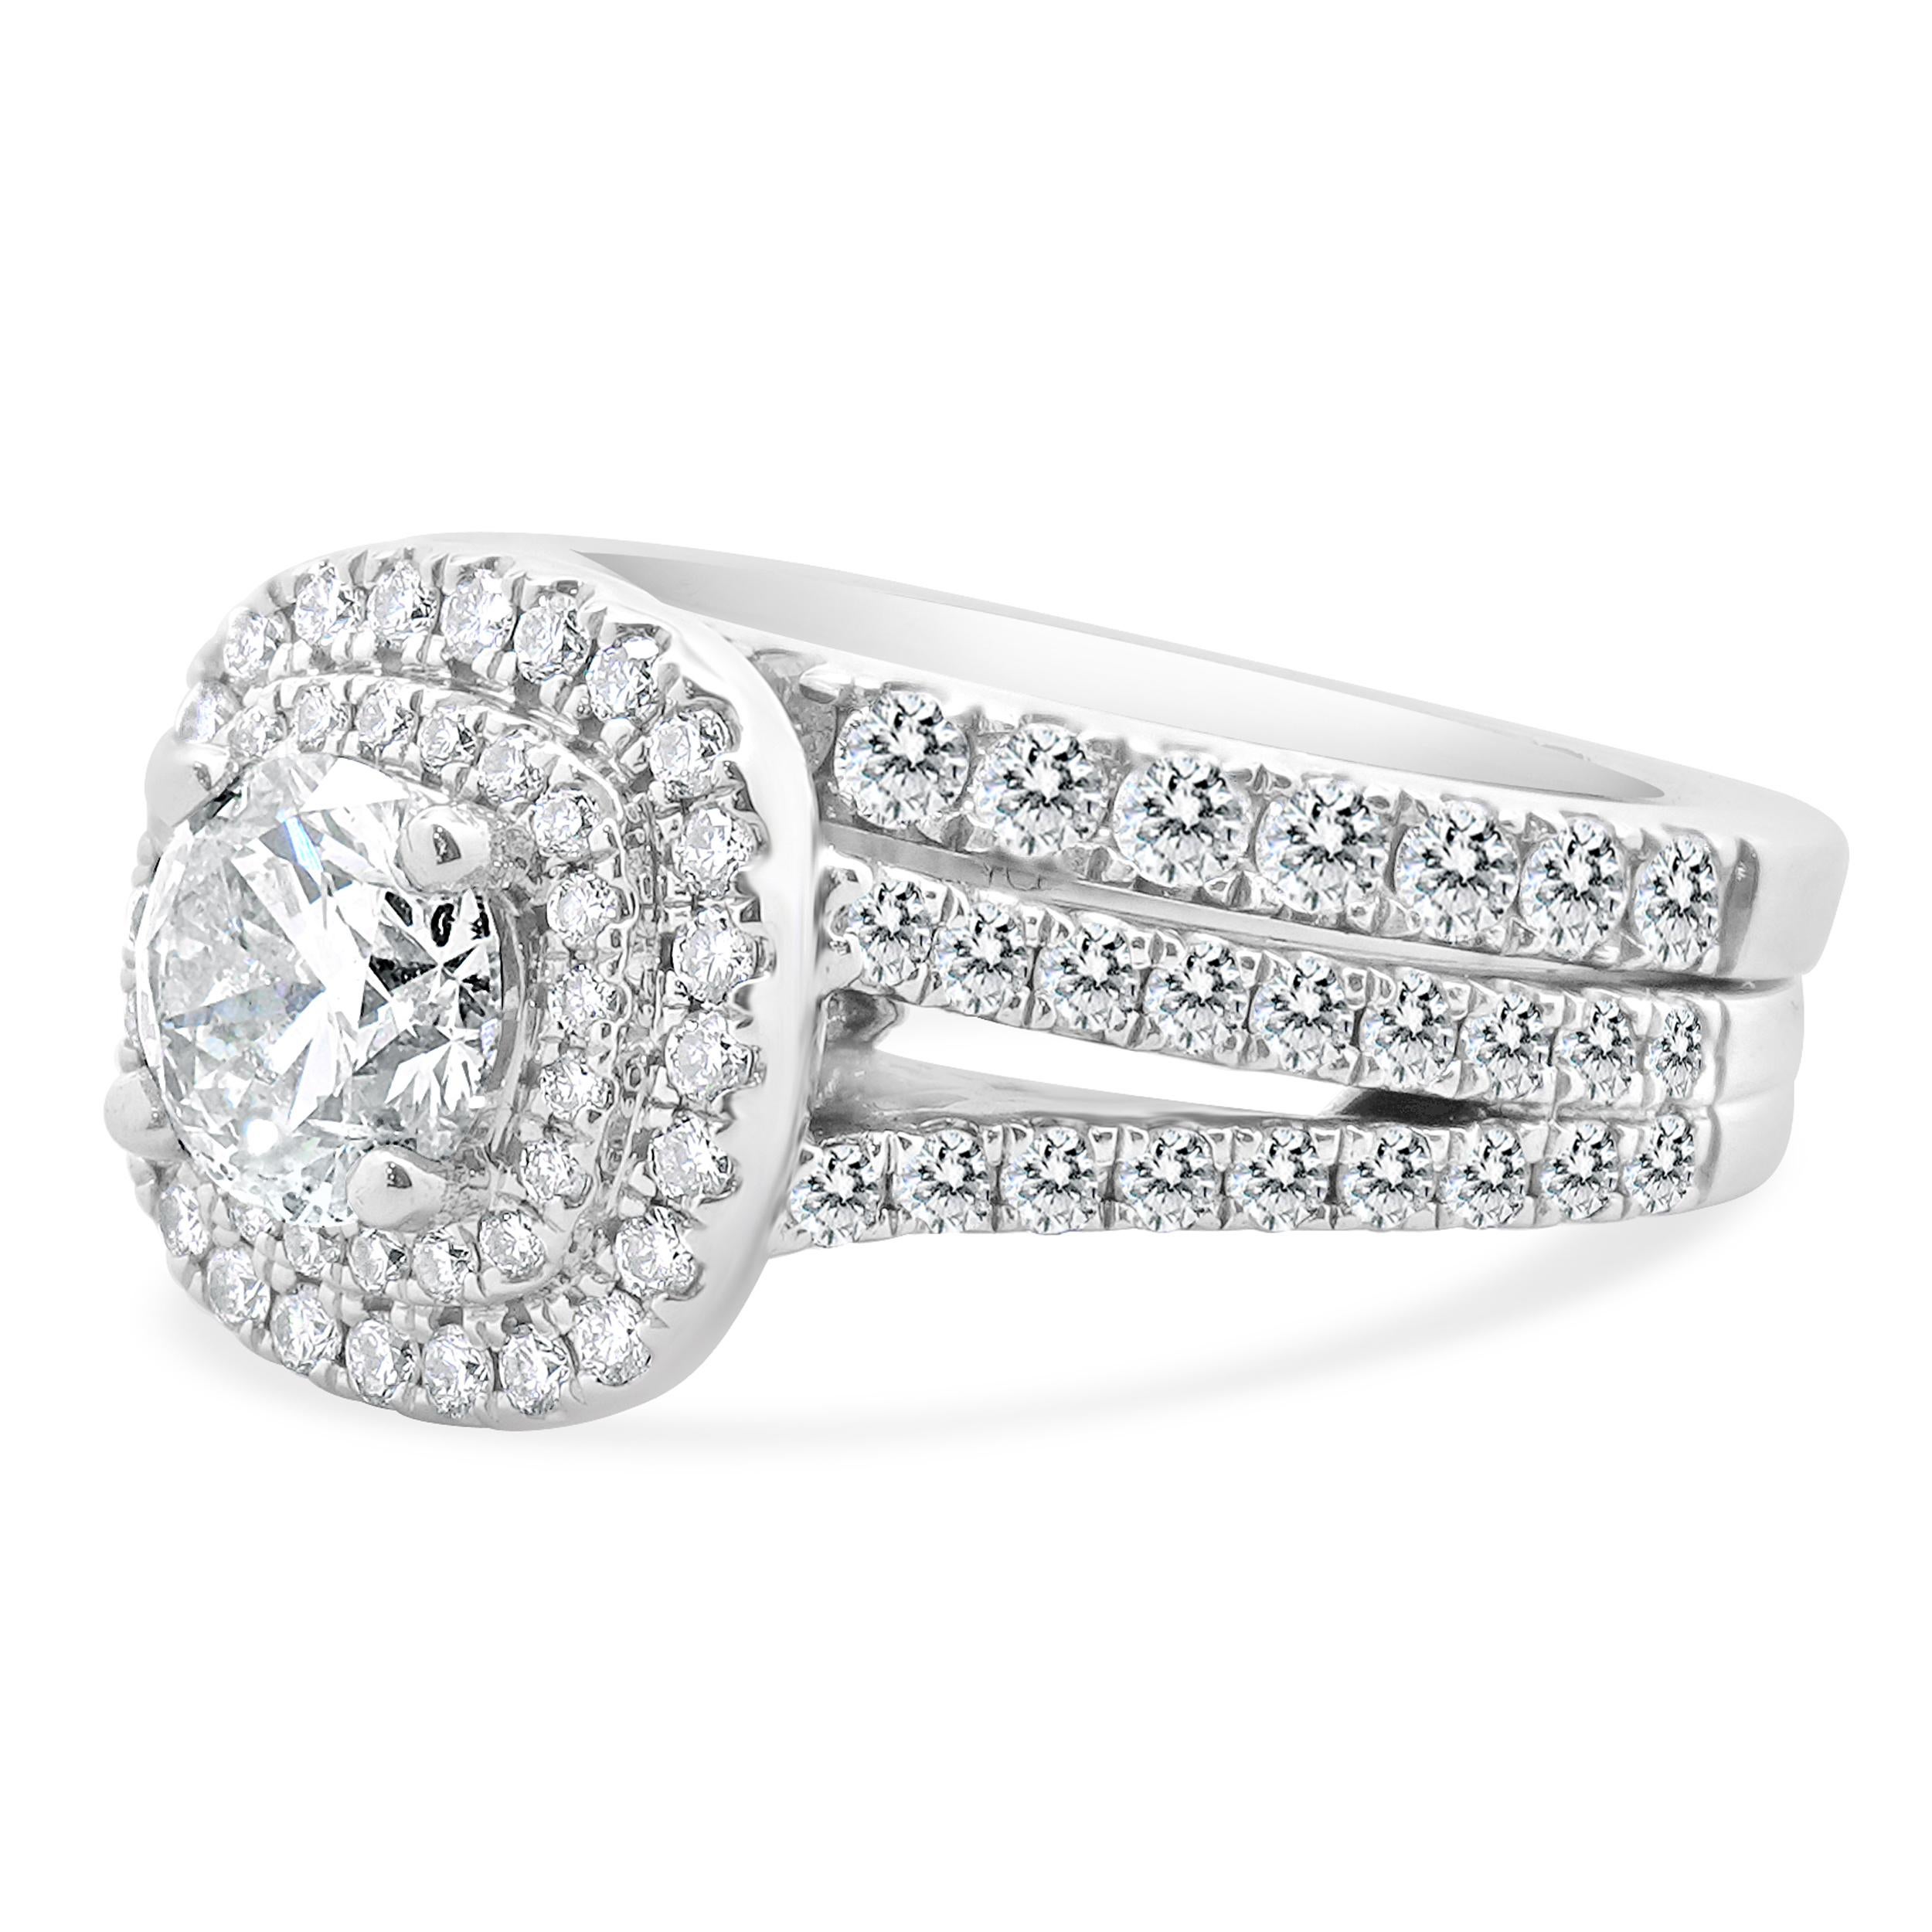 Designer: Vera Wang
Material: 14K white gold
Center Diamond: 1 round brilliant cut = 0.90ct
Color : J
Clarity : I1
Diamond: 117 round brilliant cut = 1.02cttw
Color : H-I
Clarity : SI2
Dimensions: ring top measures 12mm
Size: 5.75 complimentary